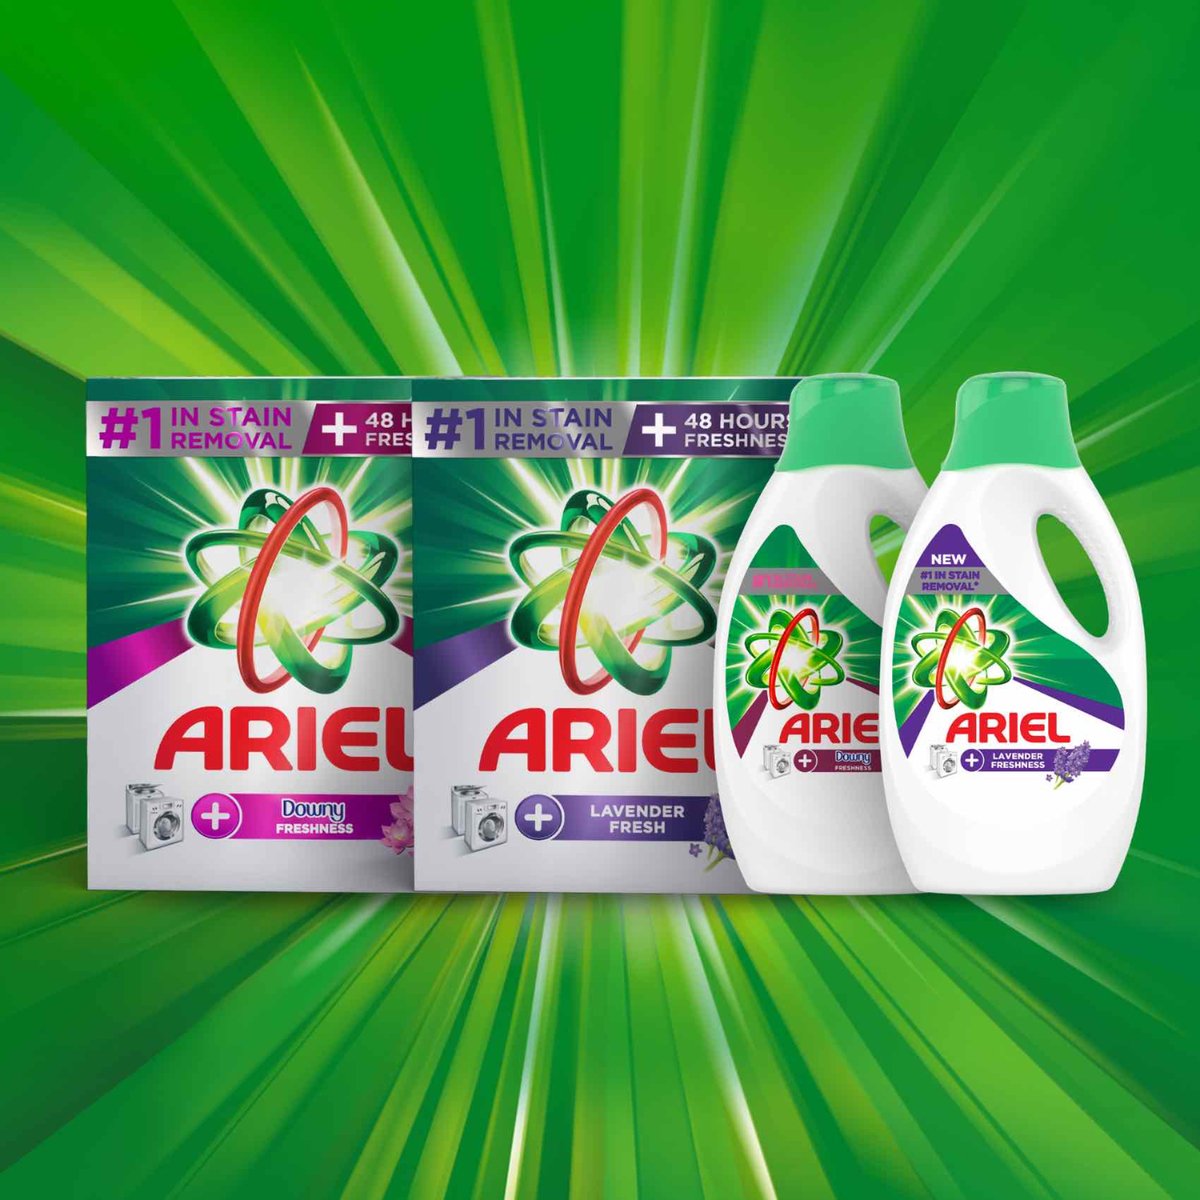 Ariel Automatic Downy Laundry Detergent Liquid Gel, Number 1 in Stain Removal with 48 Hours of Freshness, 2.8 Litres